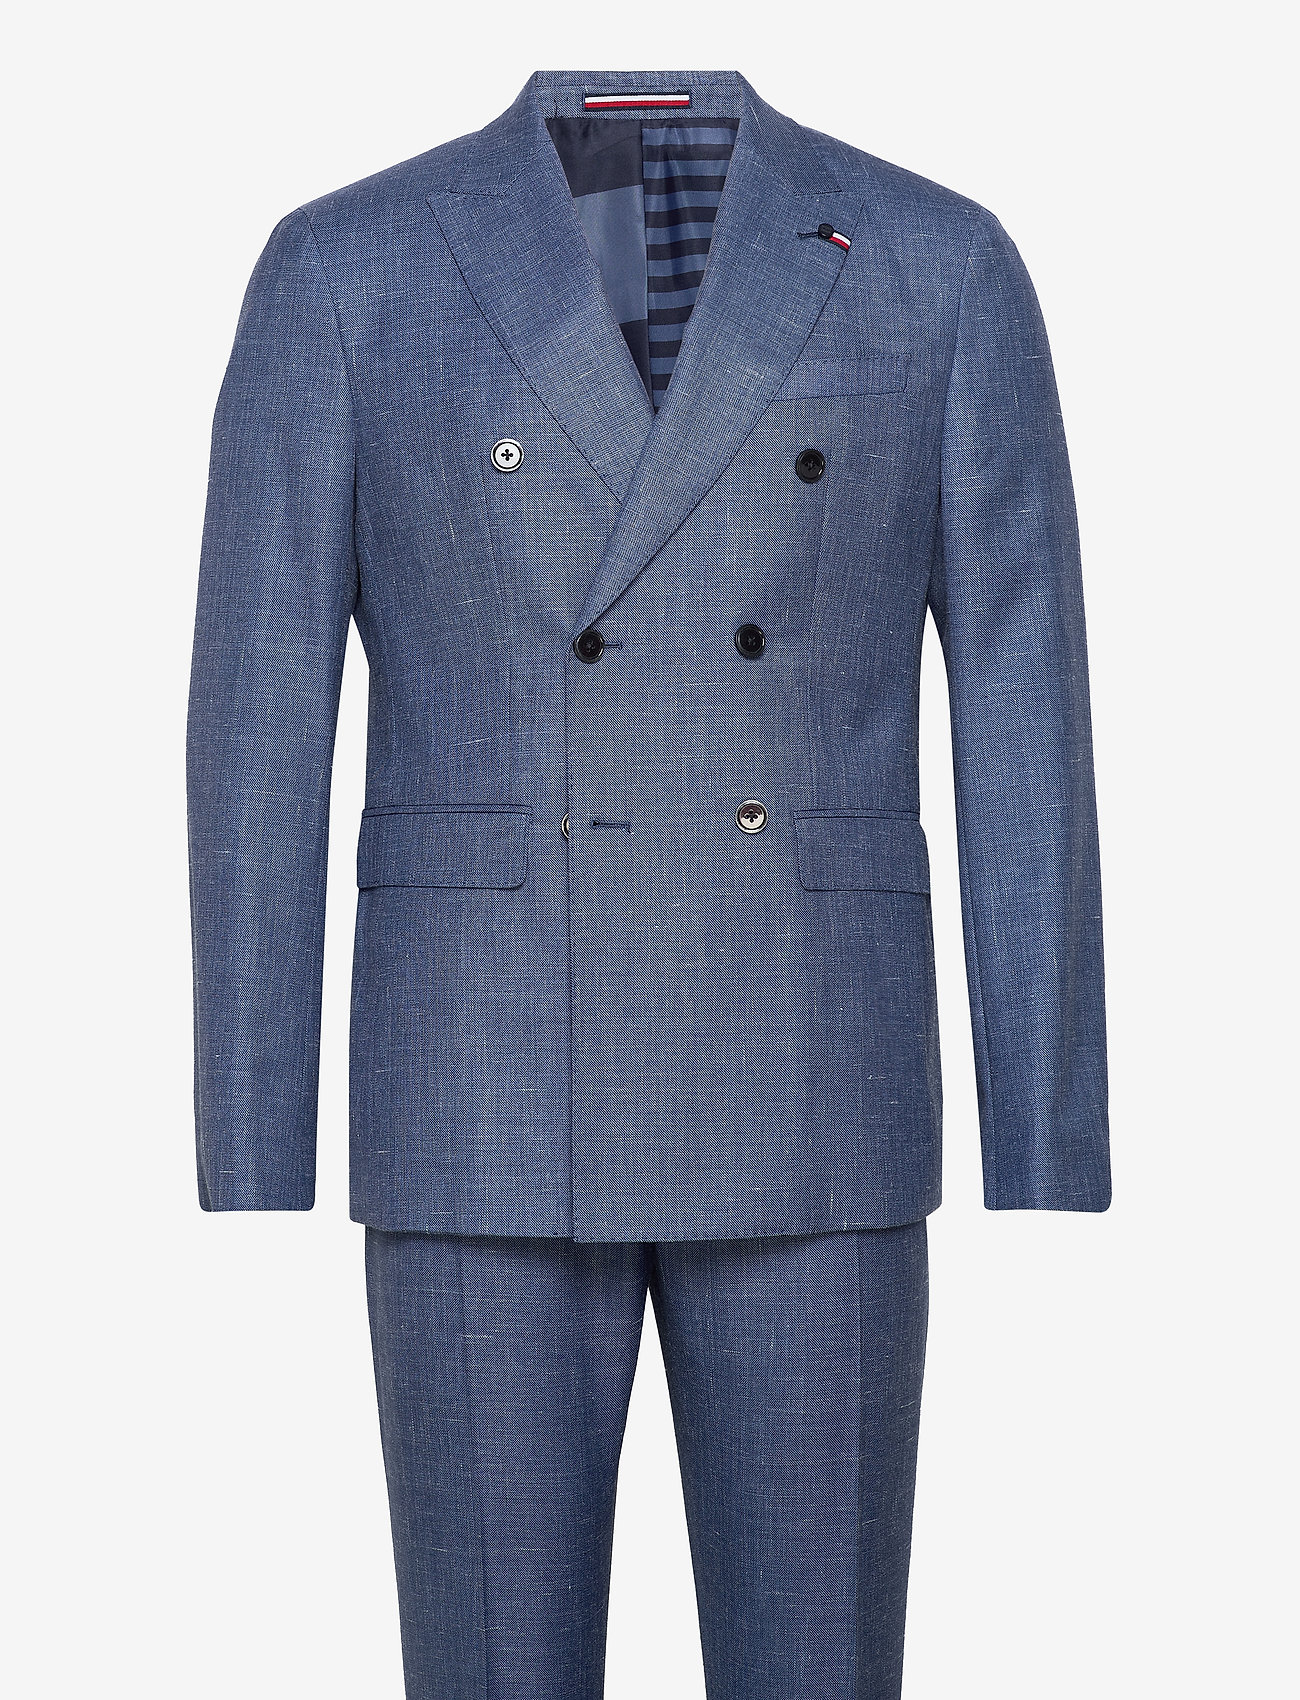 tommy hilfiger double breasted suit